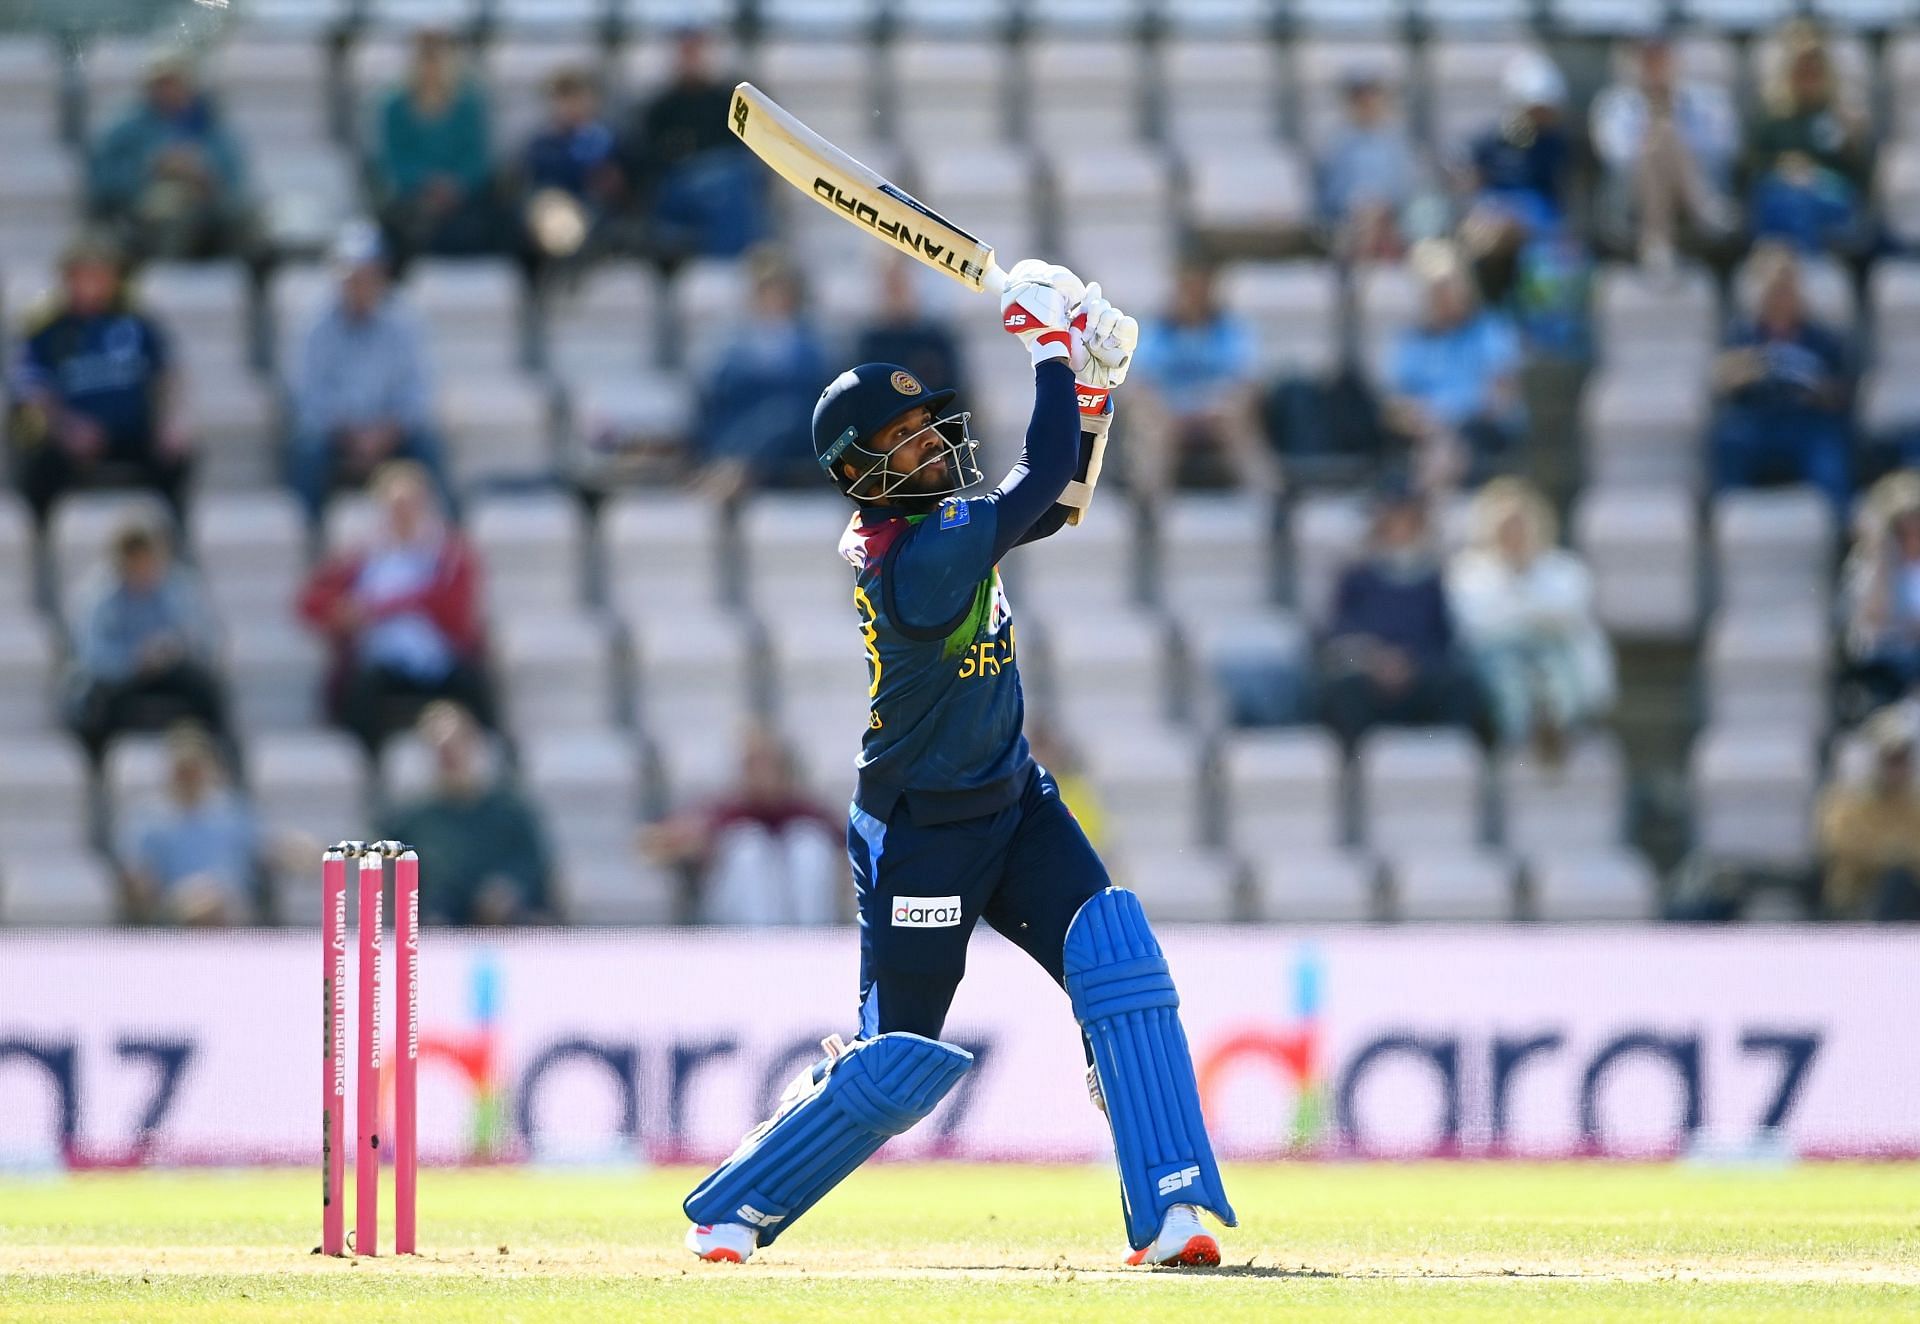 Kusal Mendis will look to make a significant contribution.